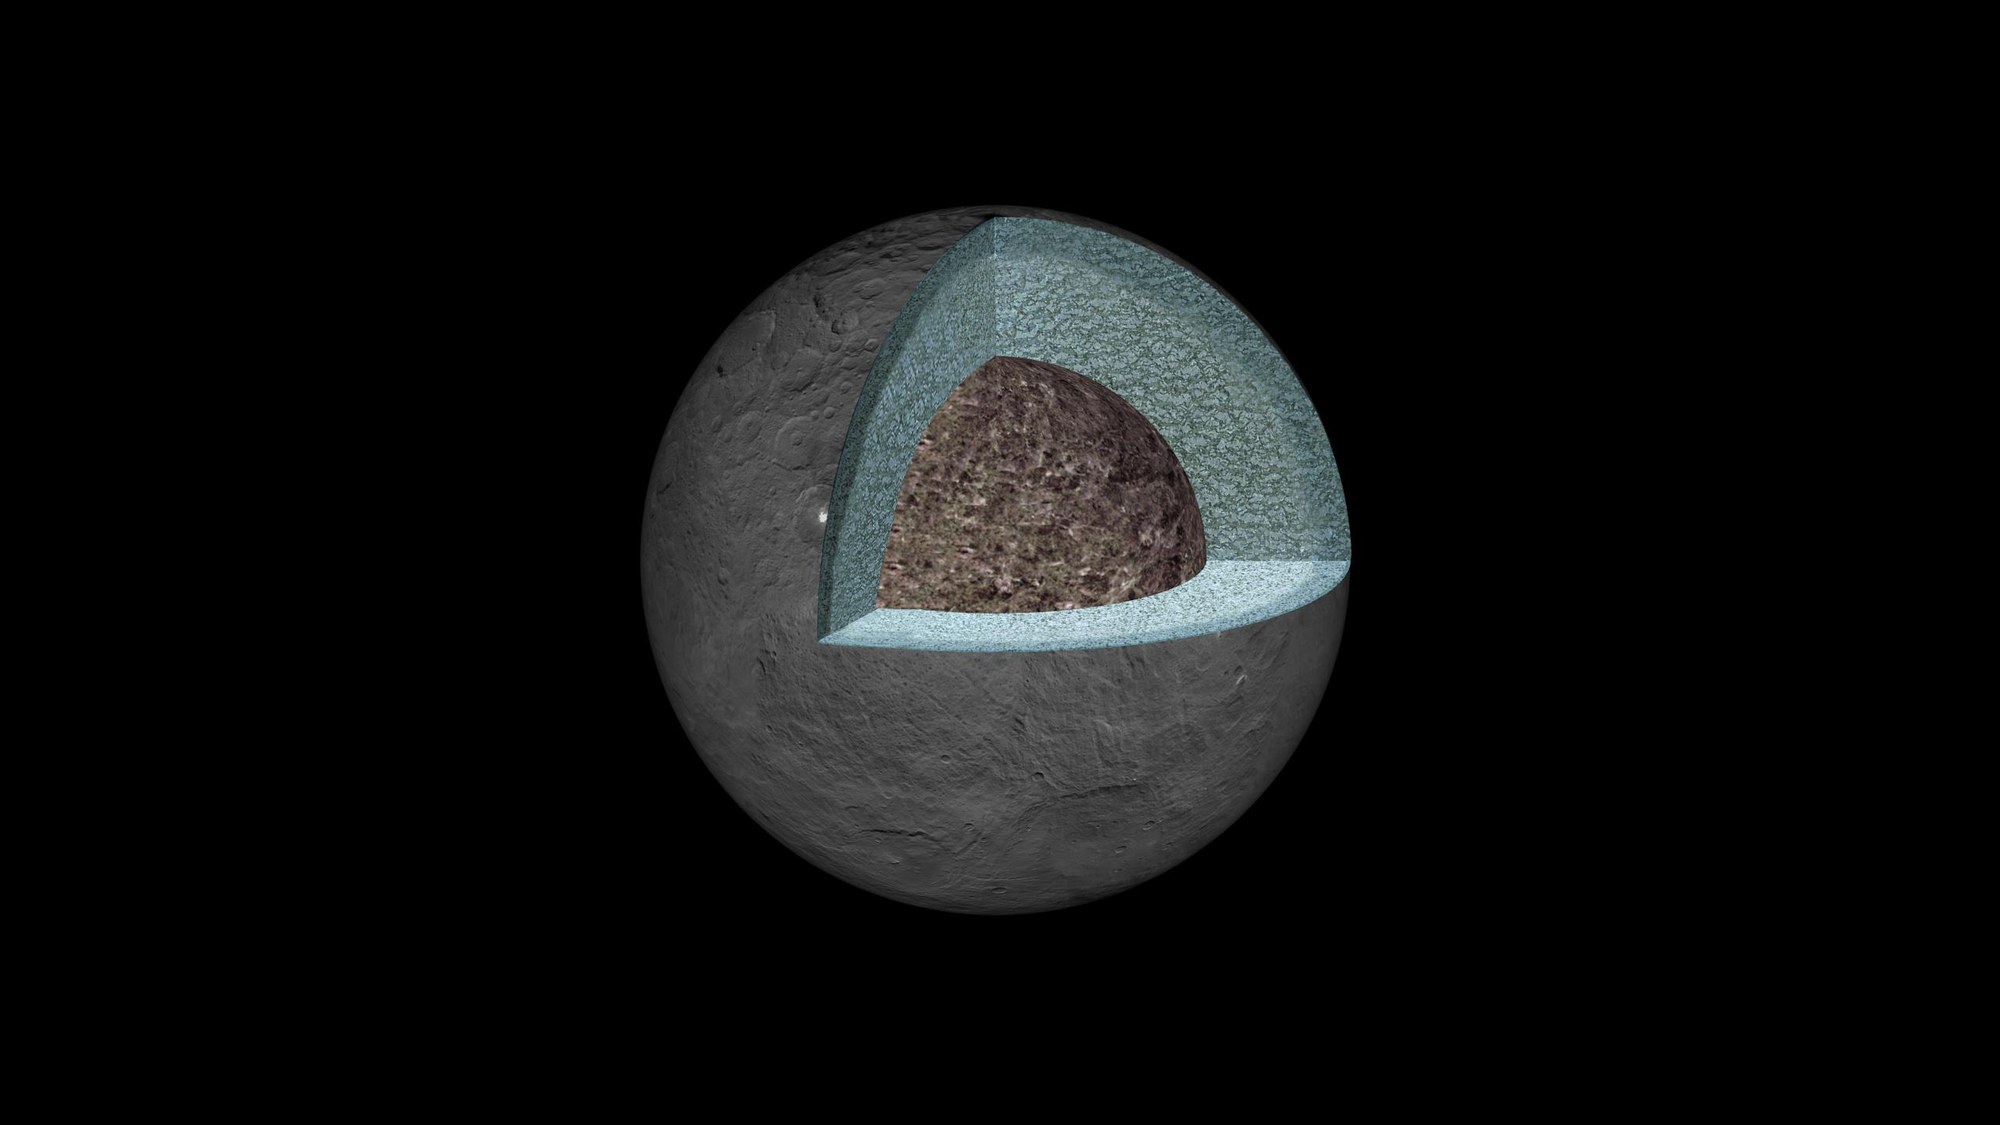 Ceres – an icy dwarf